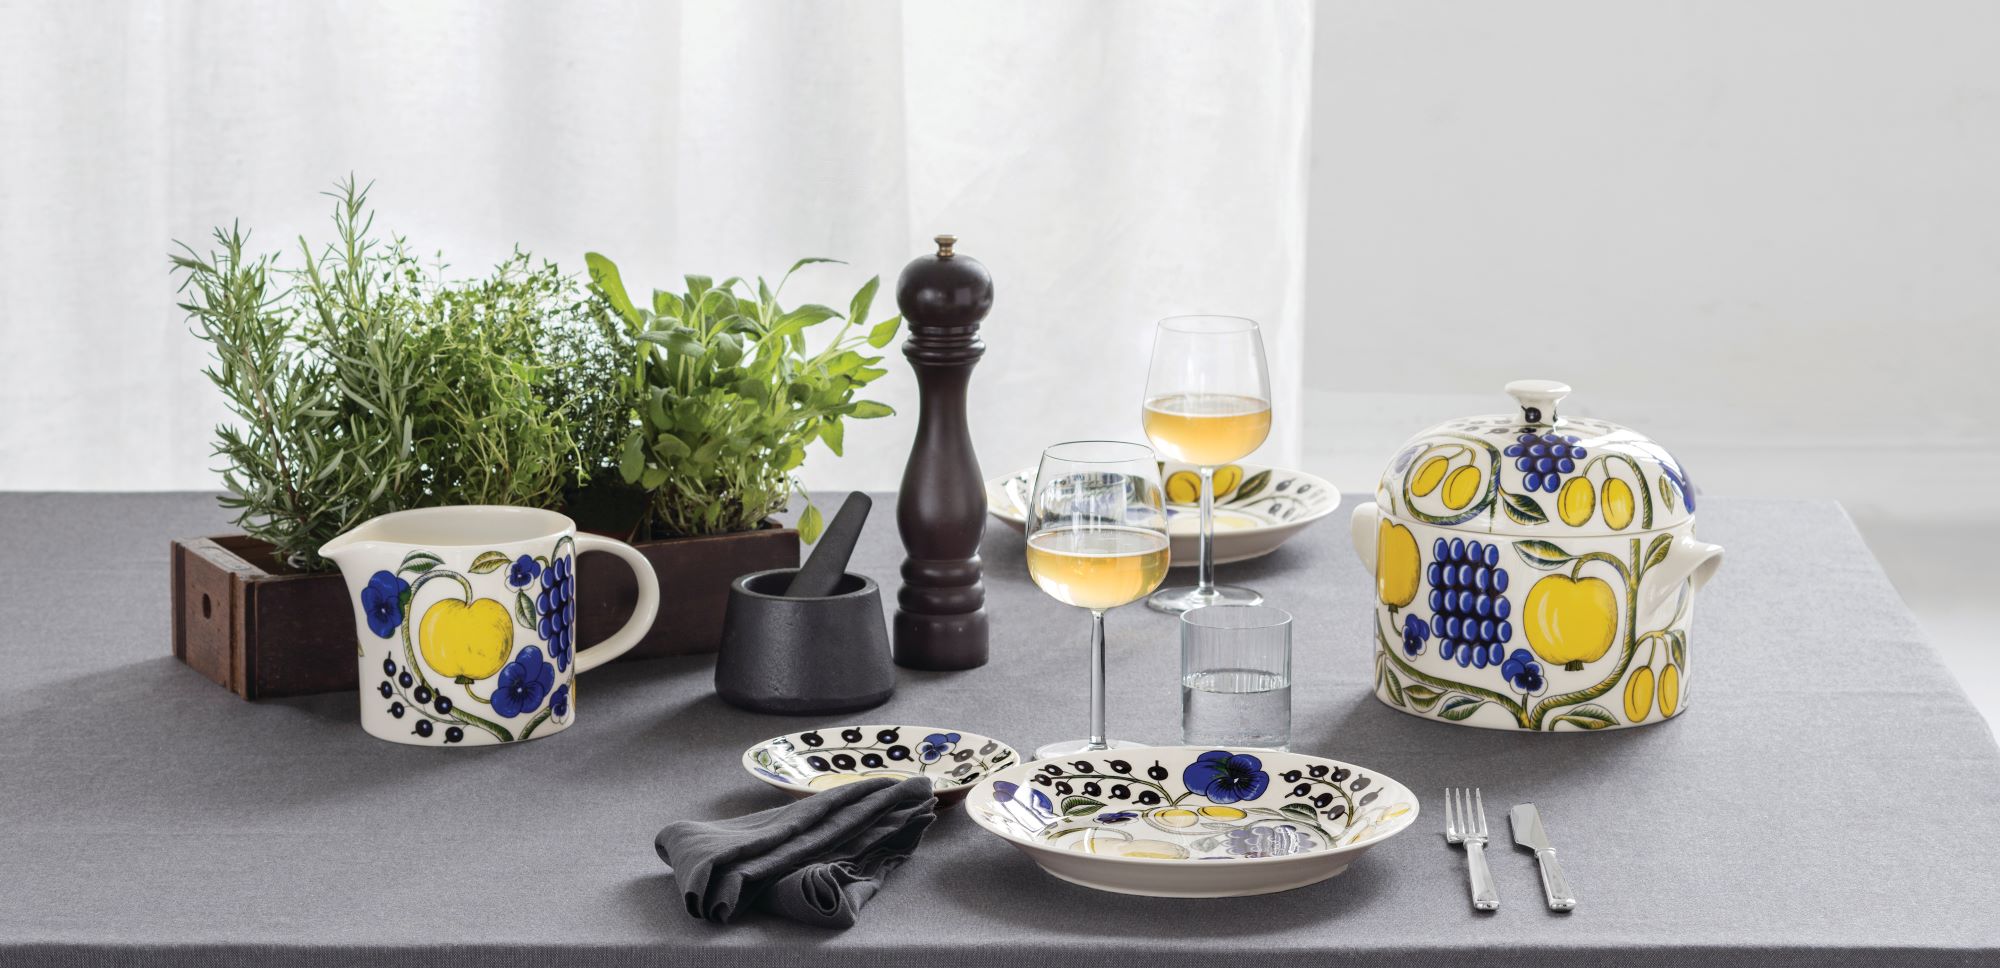 Colorful patterned Arabia dishes, herbs and spices in a kitchen setting.